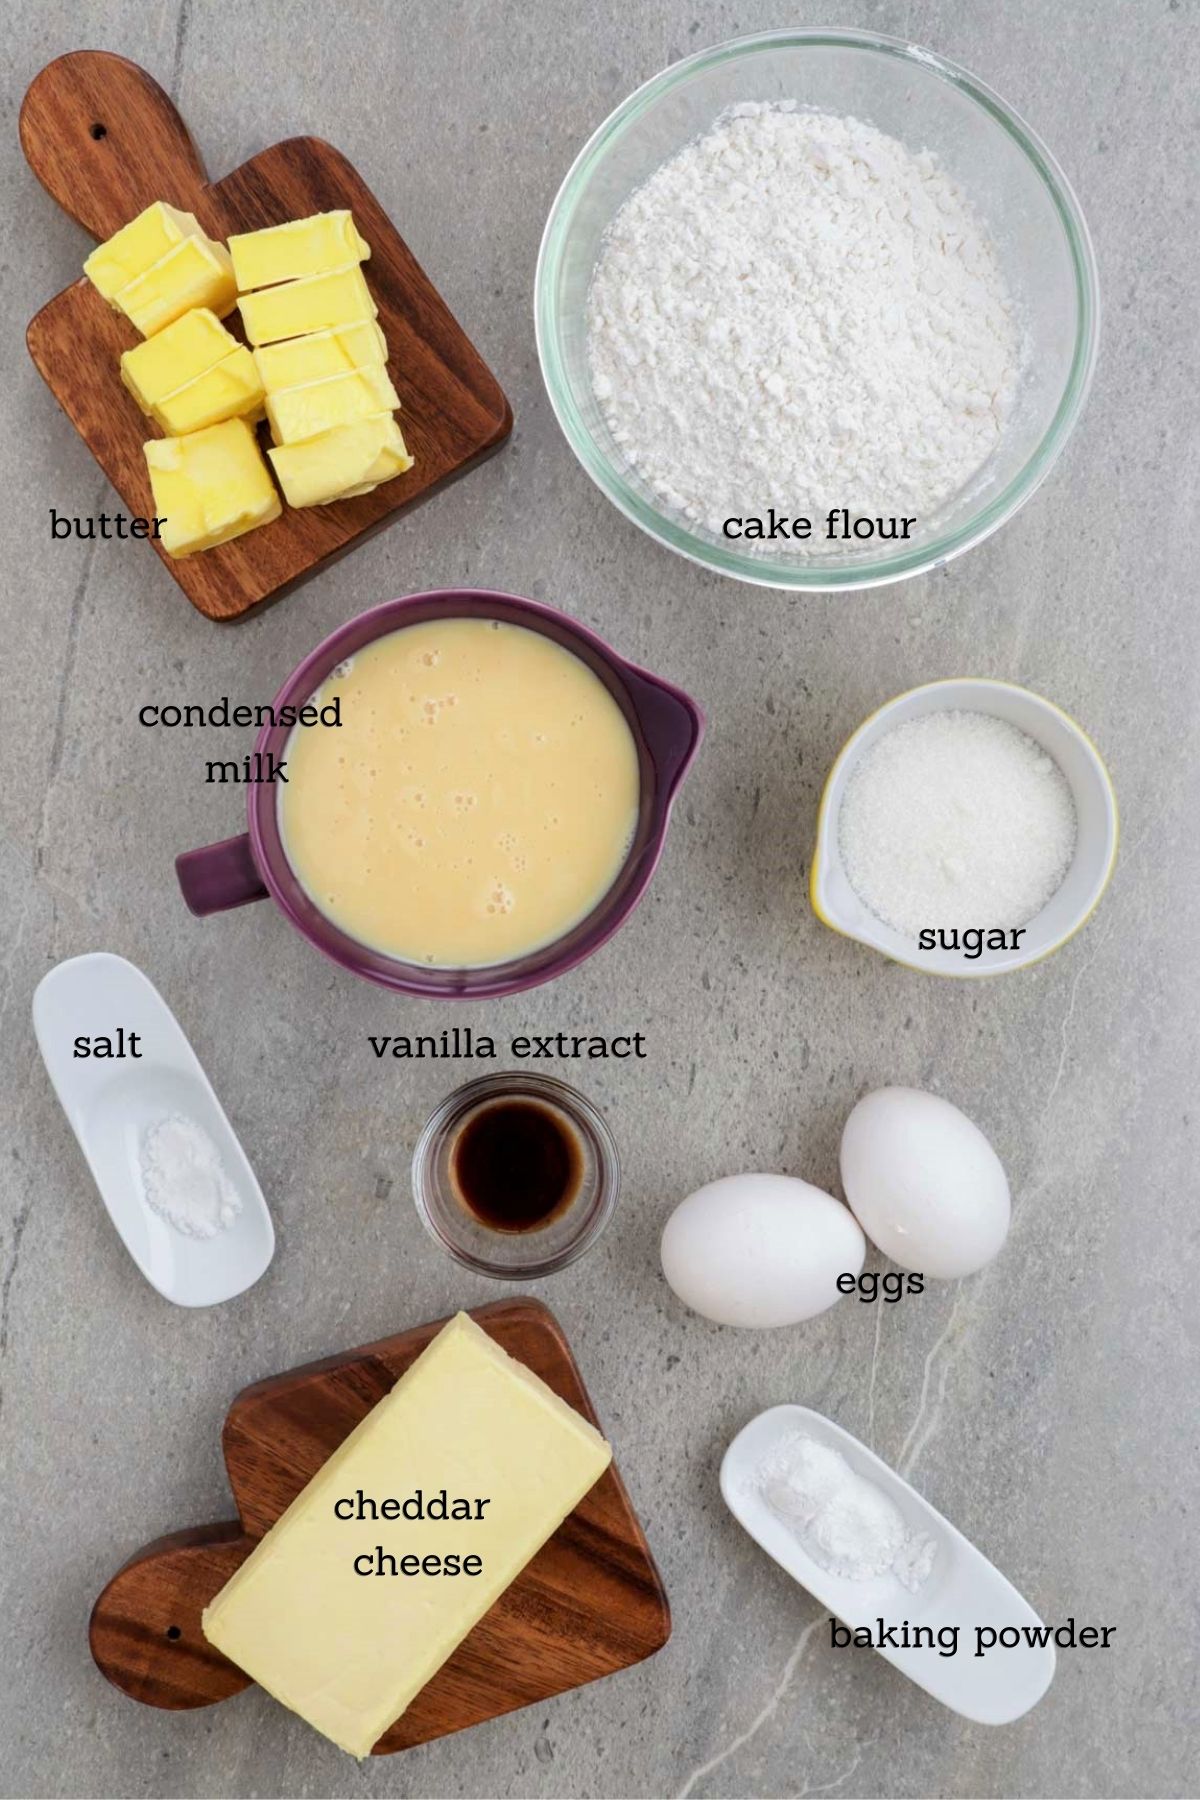 Ingredients for cheese cupcakes.